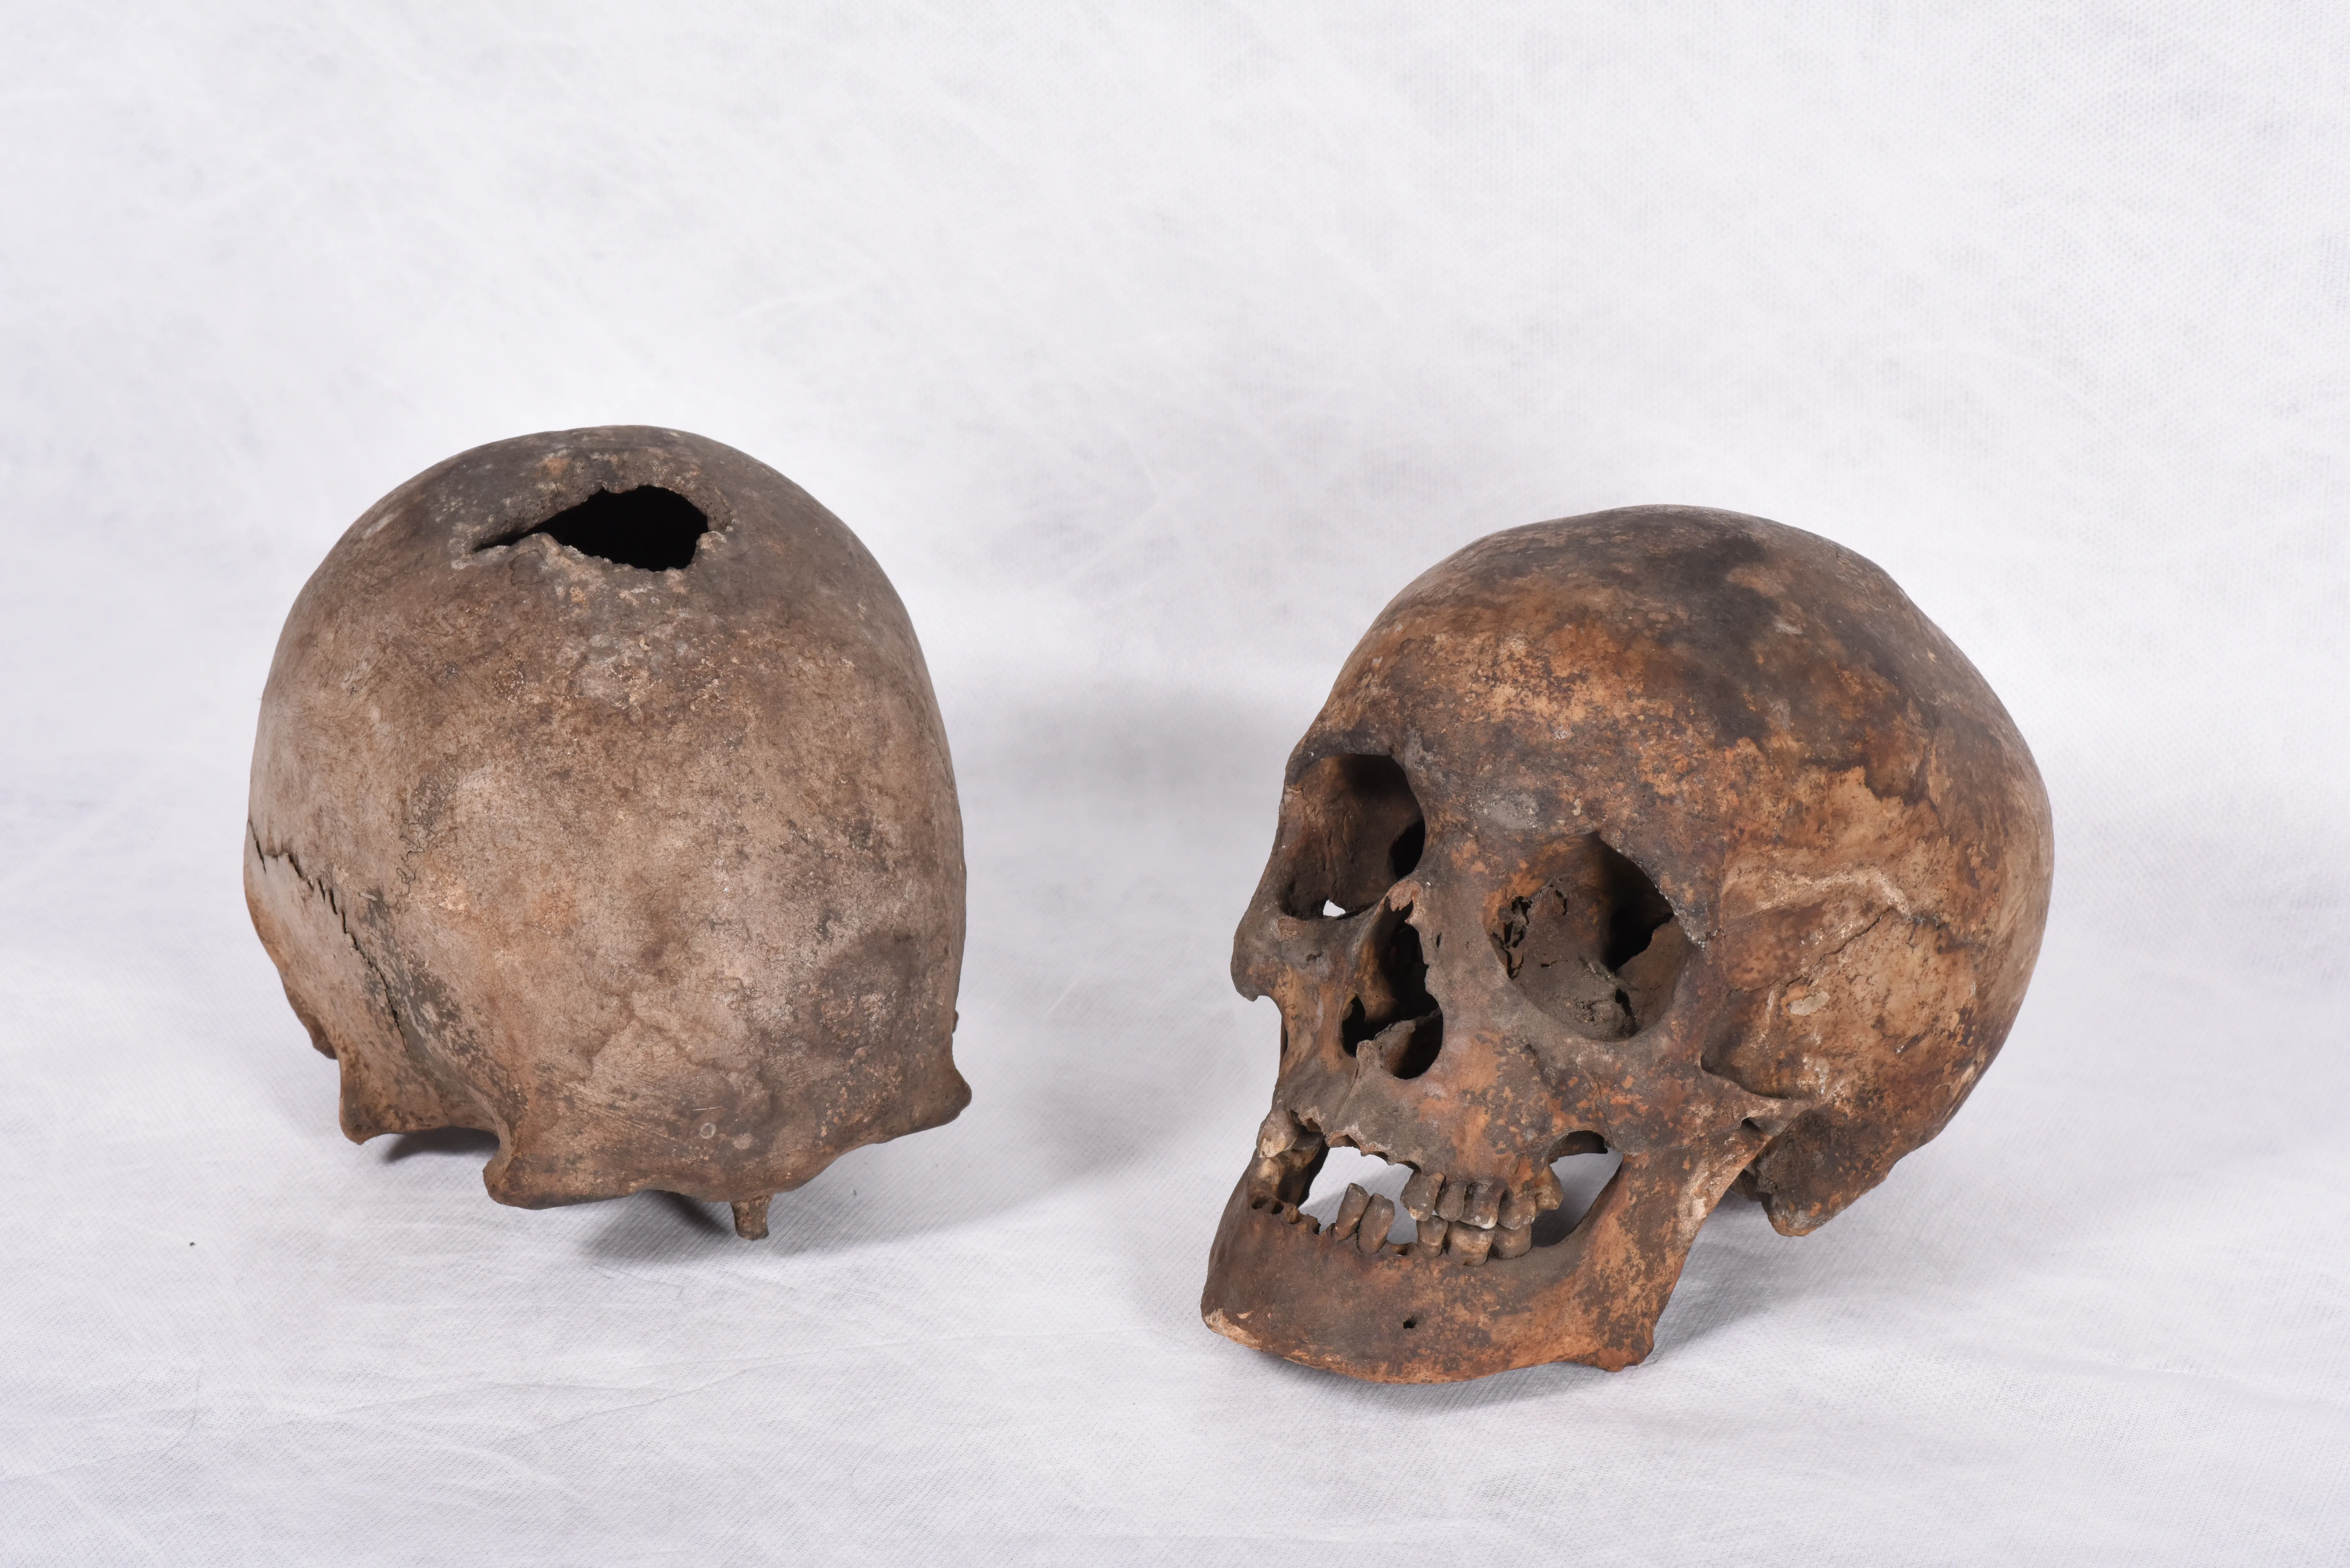 Skulls identified as those of the Welsh Catholic martyrs Philip Evans and John Lloyd?w=200&h=150